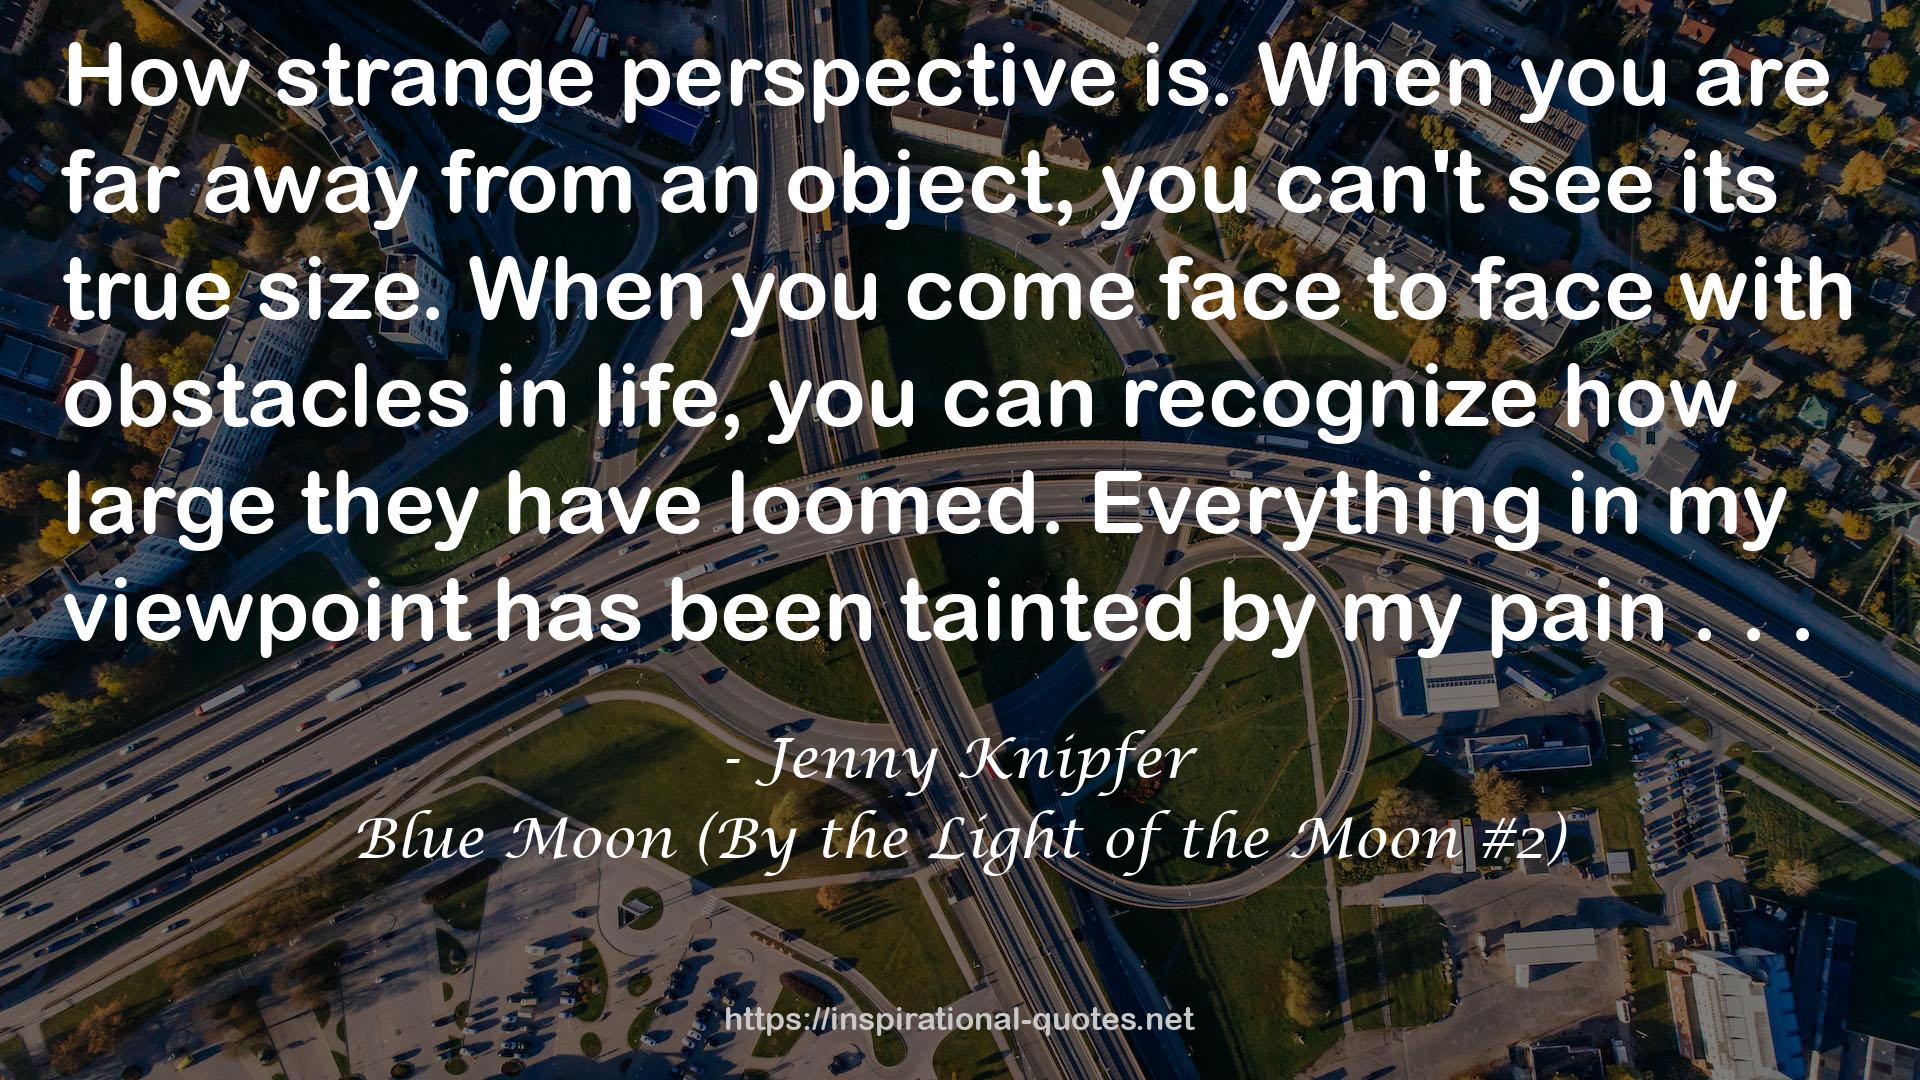 Blue Moon (By the Light of the Moon #2) QUOTES